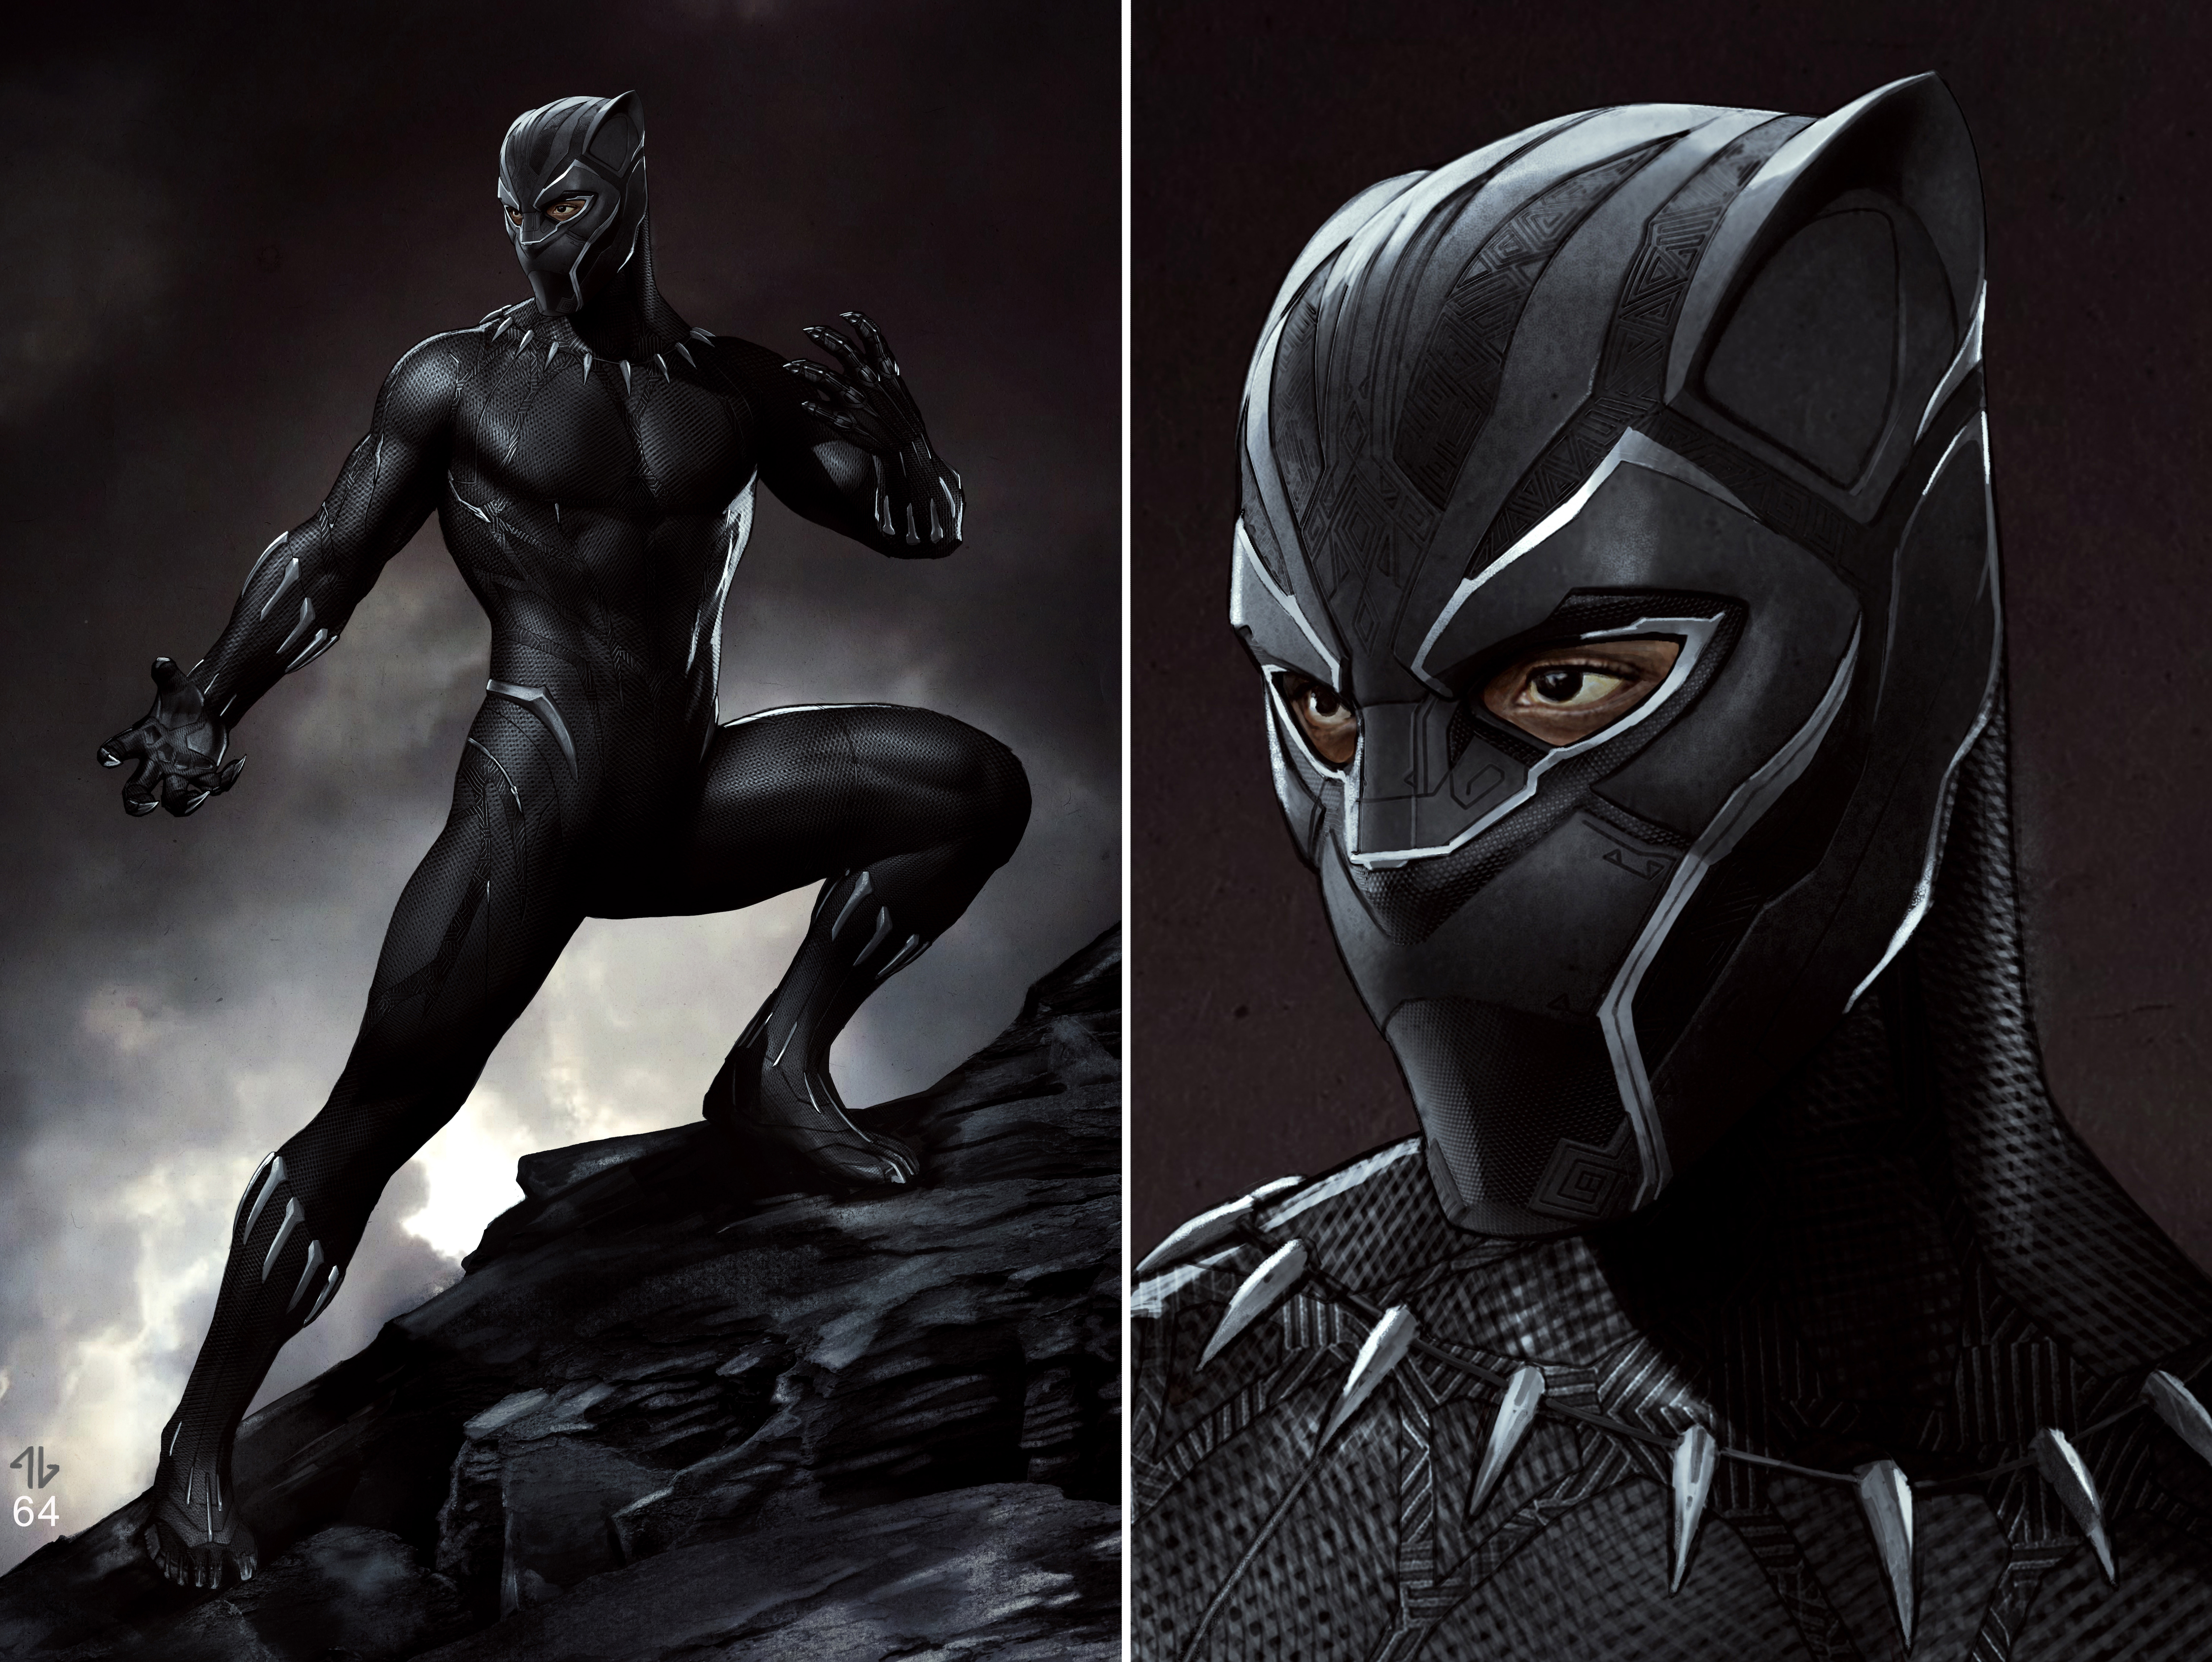 Marvel Studios' “Black Panther.” Black Panther Conceptual Character and Costume Design Sketch. Costume Design and Art by Ryan Meinderding and VisDev Team.